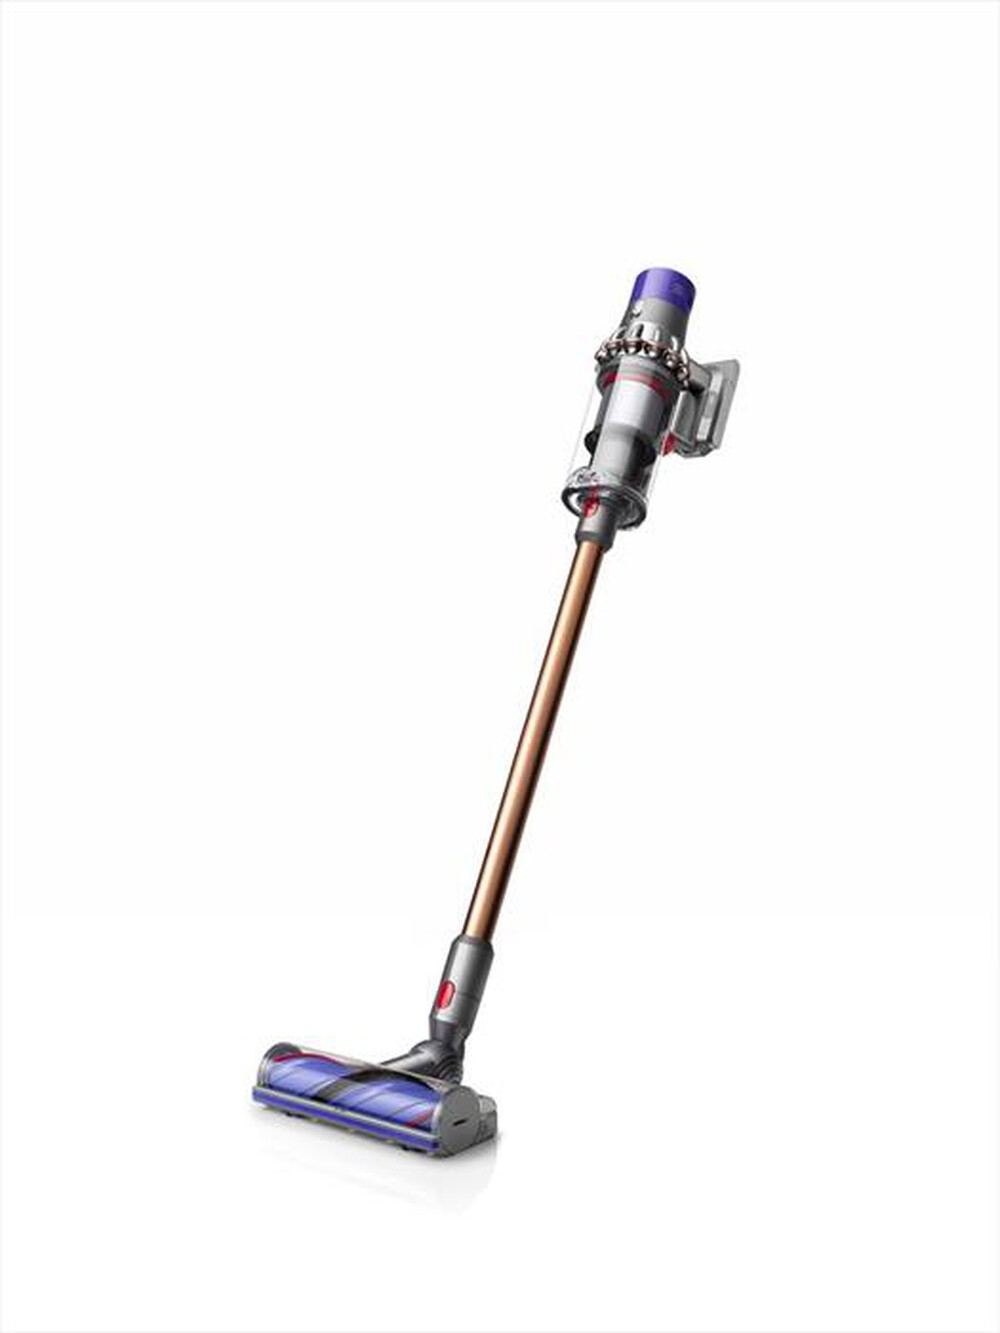 "DYSON - V10 ABSOLUTE NEW"